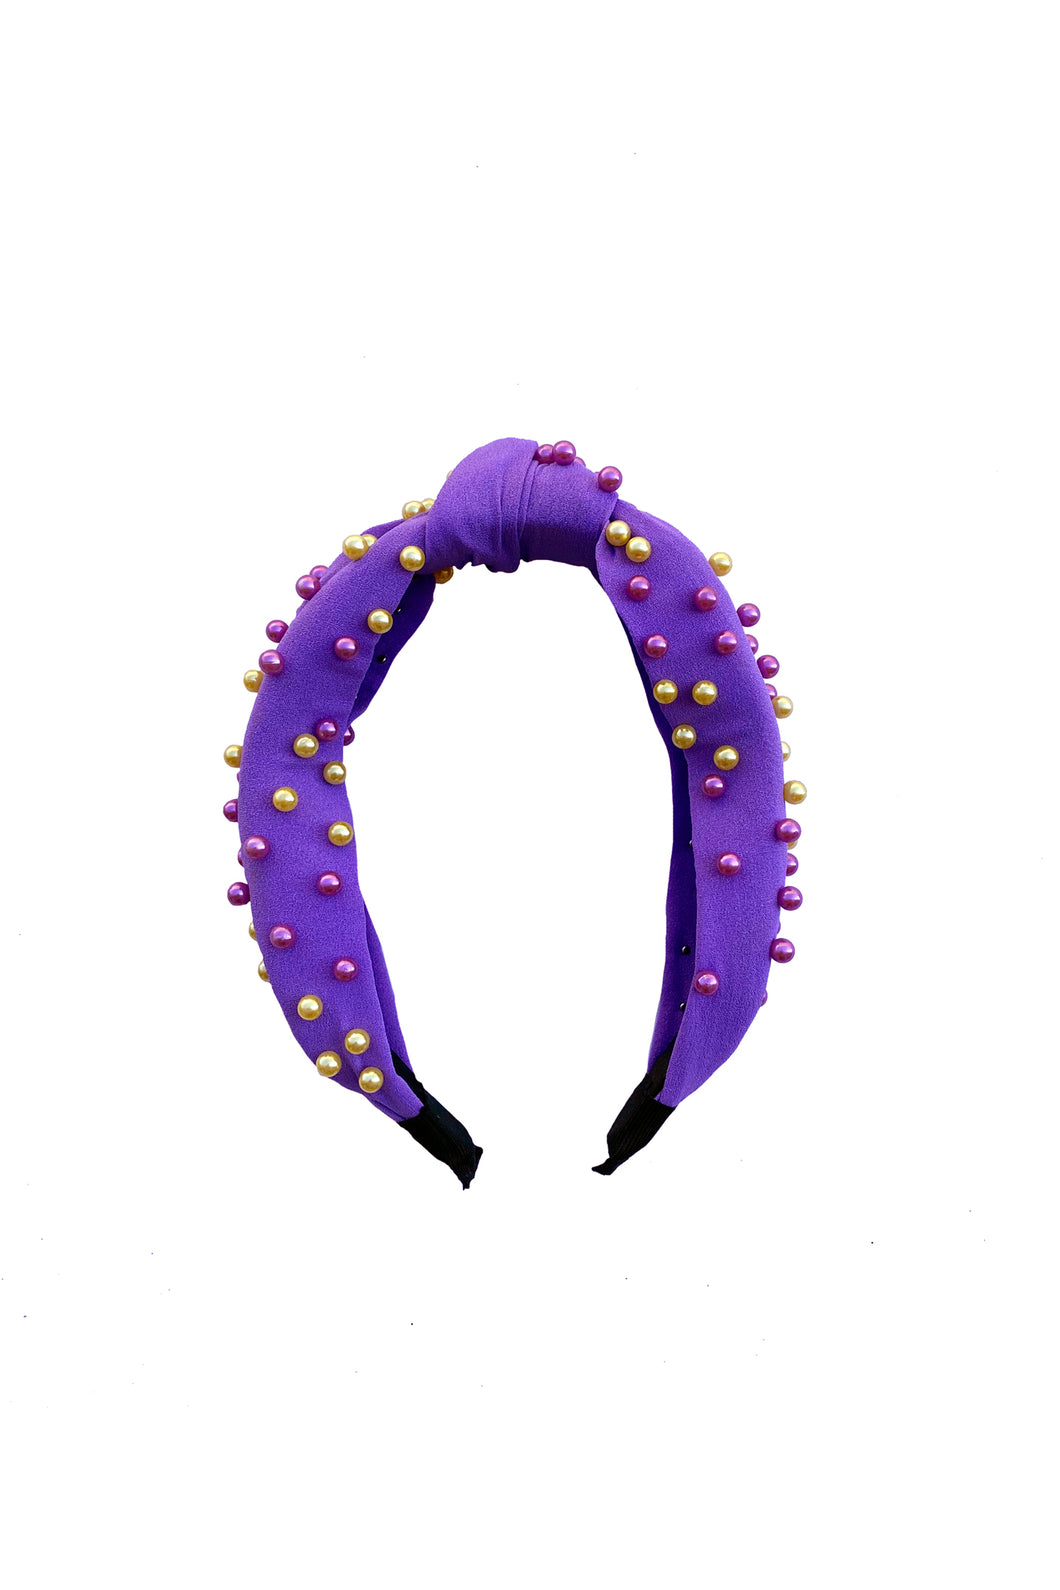 Pearl Headband - Lavender with Purple and Gold Beads